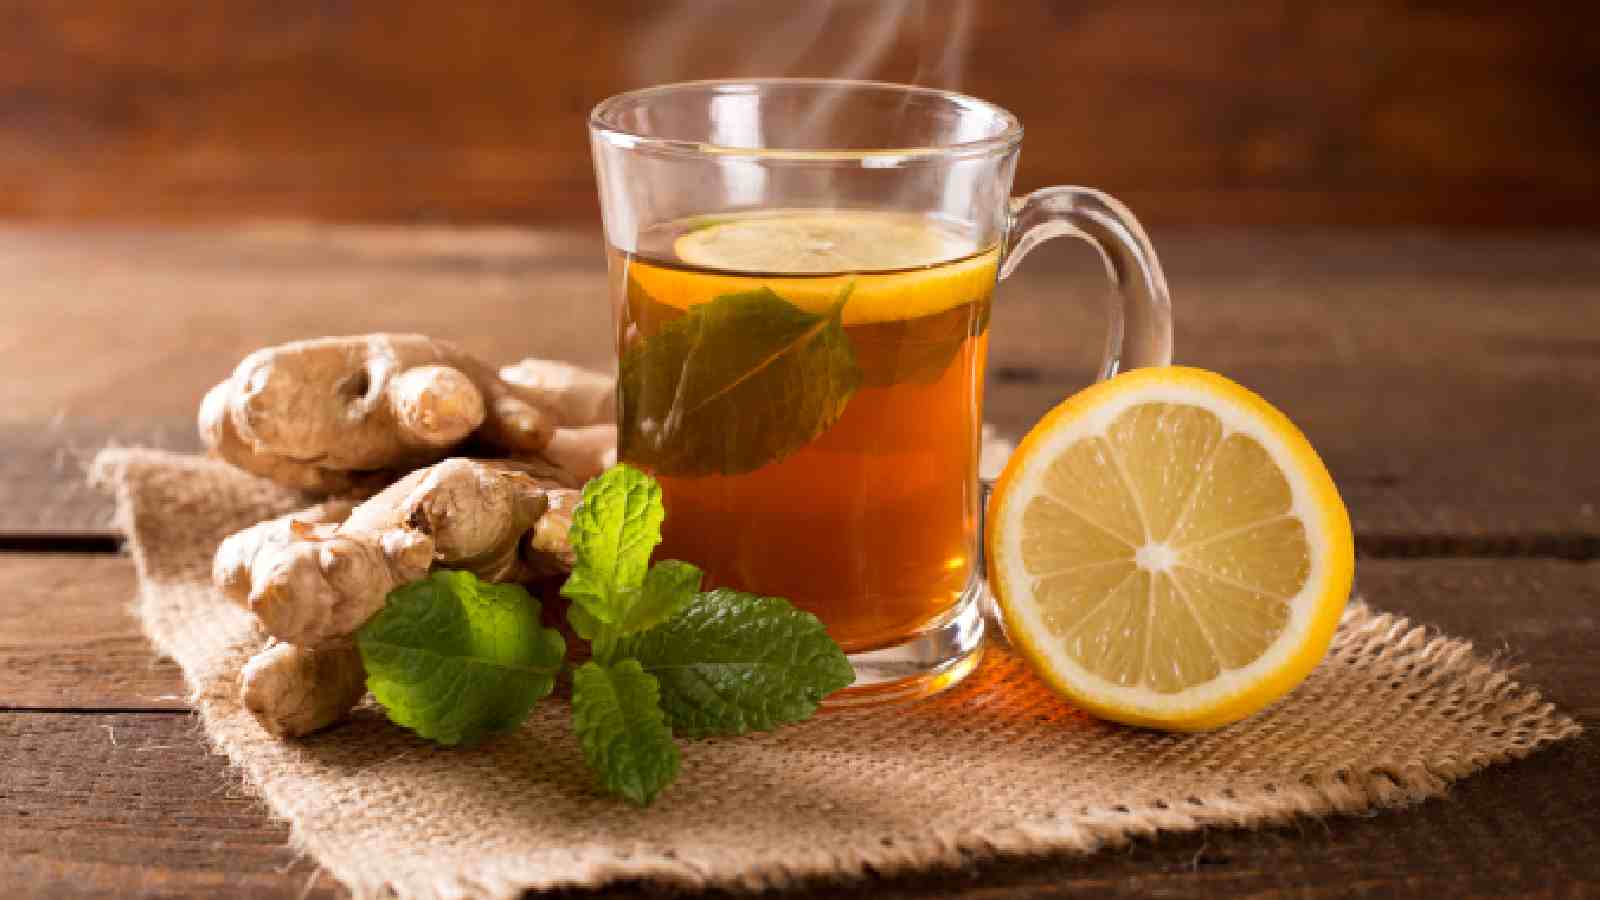 Ginger in monsoon: My mom swears by this immunity booster